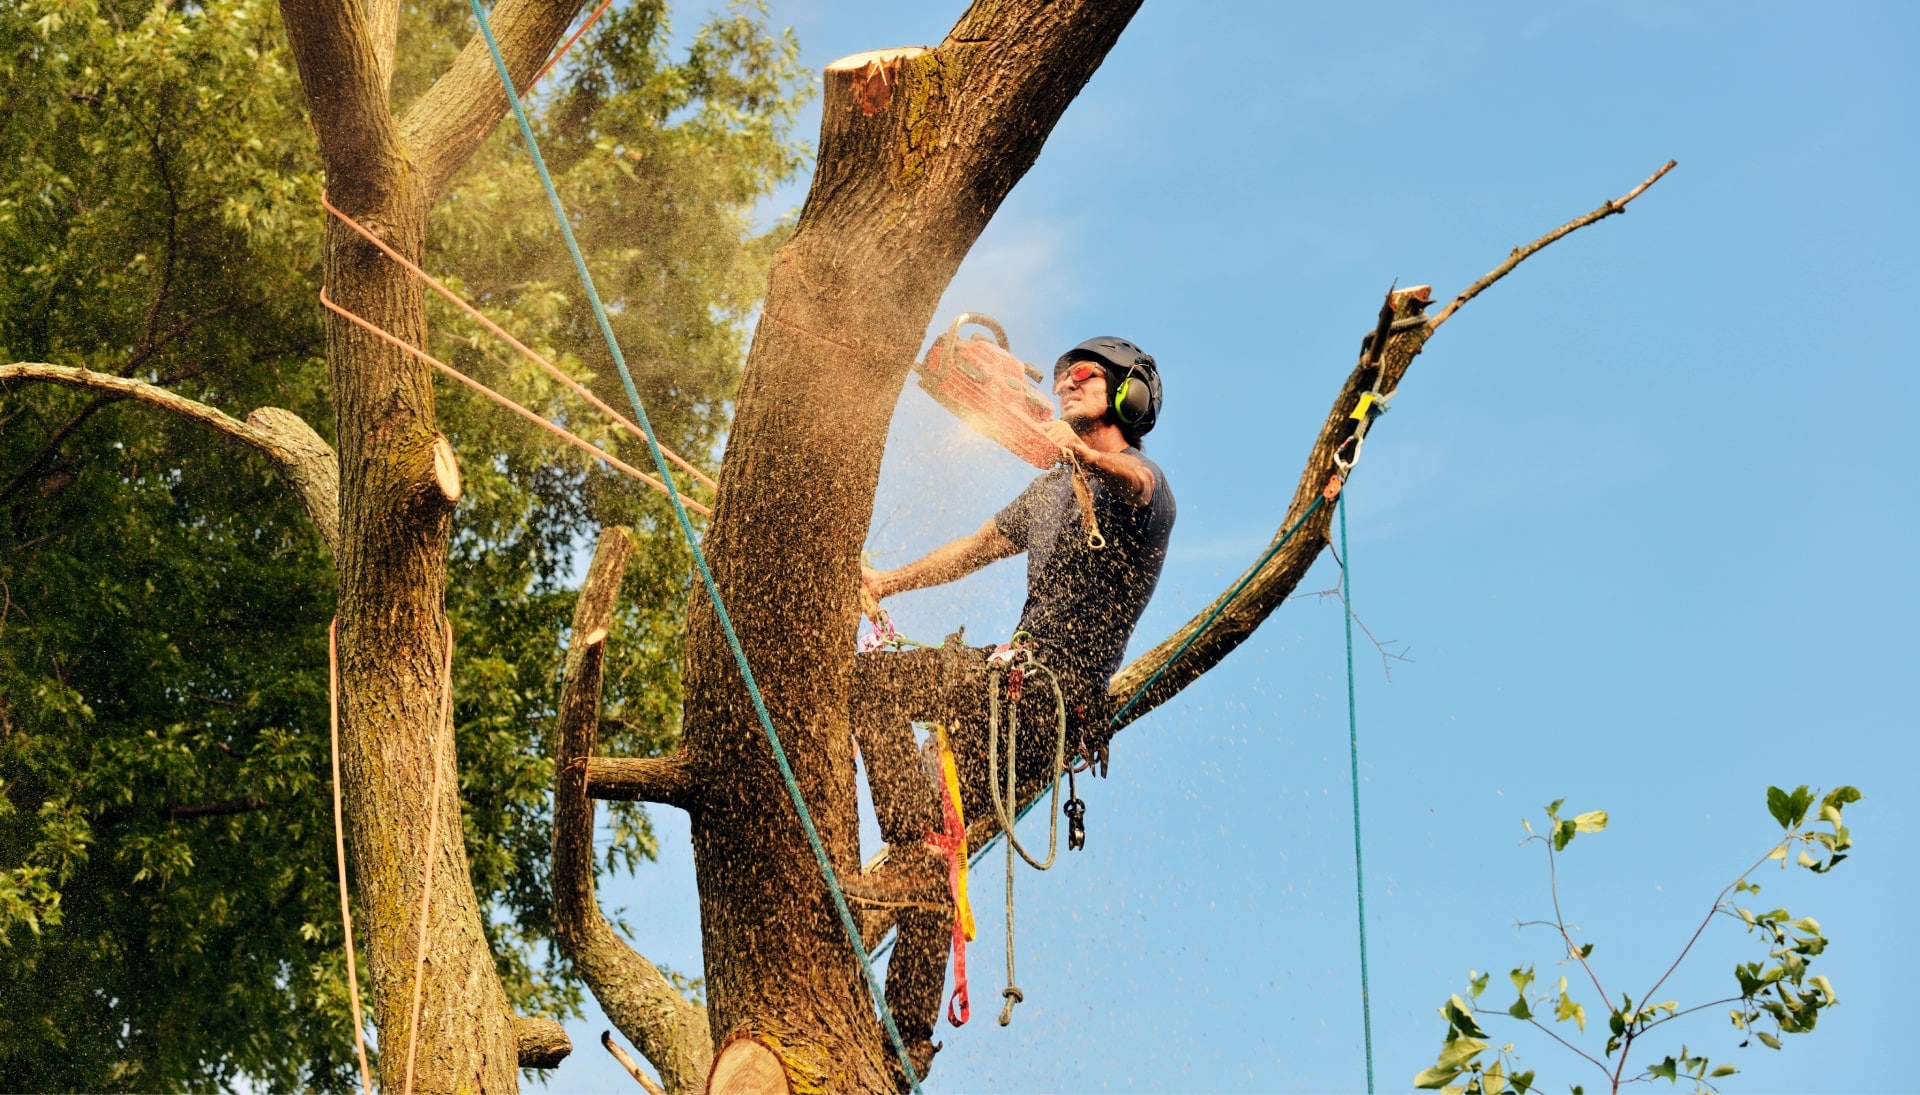 Lexington tree removal experts solve tree issues.